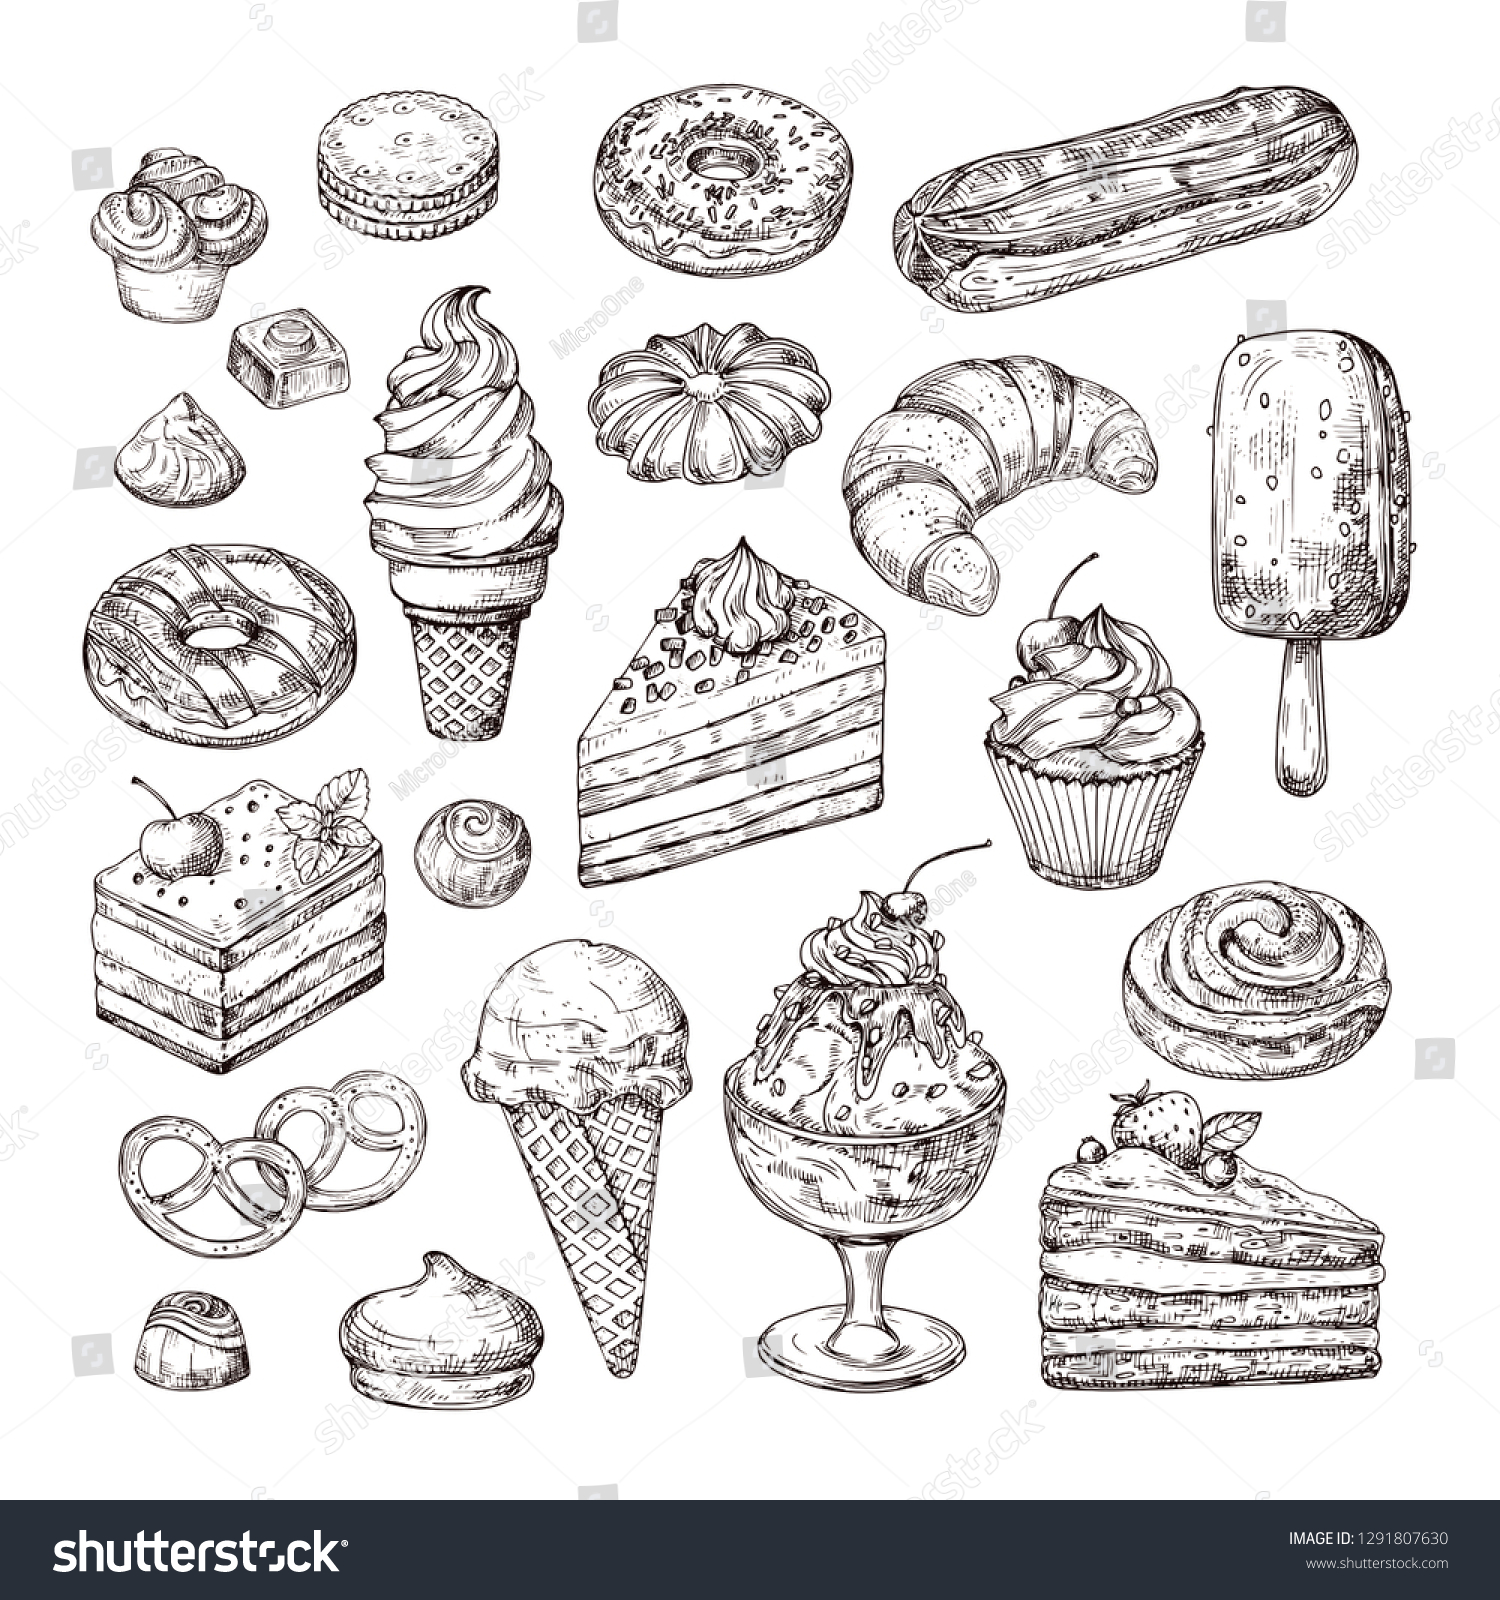 Sketch dessert. Cake, pastry and ice cream, apple strudel and muffin in vintage engraving style. Hand drawn fruit desserts vector set. Illustration of cake with cream, dessert sketch, pastry sweet